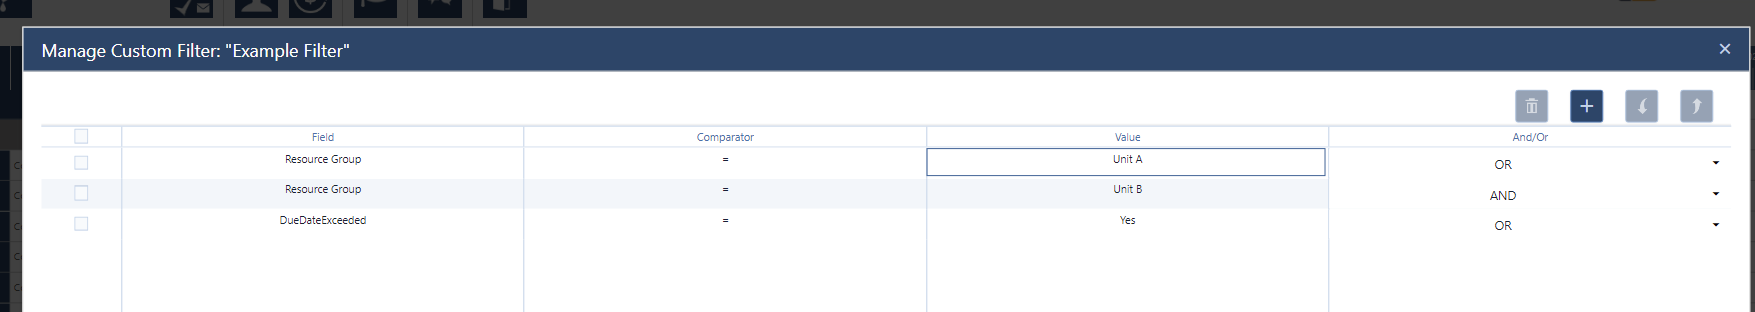 new custom filter in just plan it - production scheduling software for HMLV manufacturer